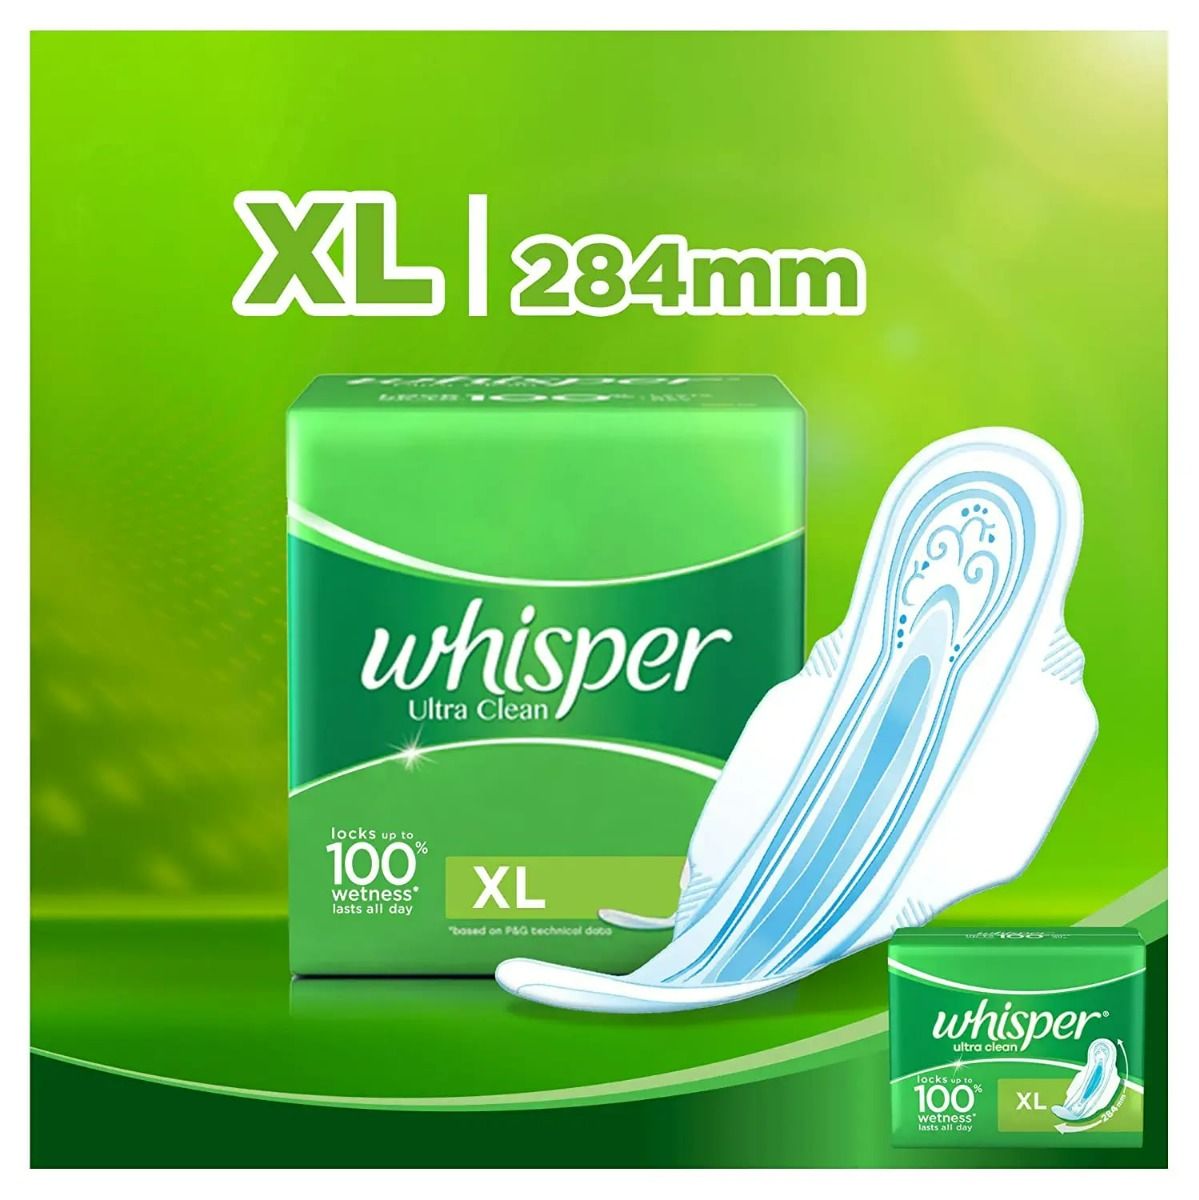 Whisper Ultra Clean Sanitary Pads XL, 15 Count, Pack of 1 